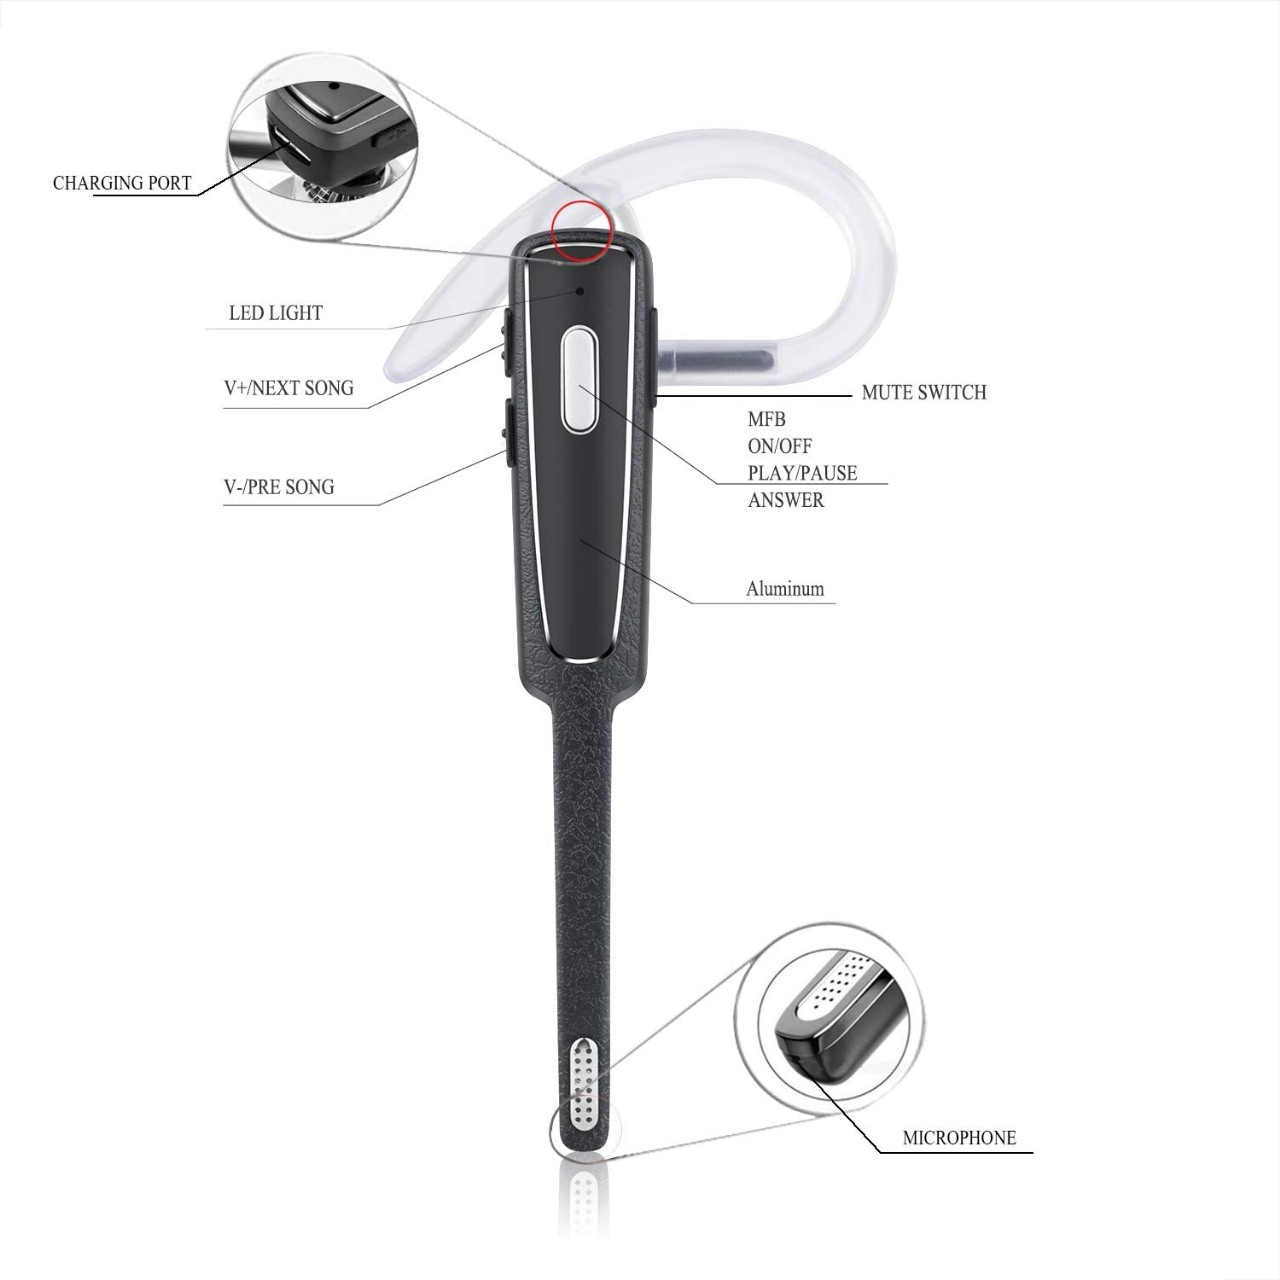 Bluetooth Headset, Candeo Ultralight Bluetooth Phone Earpiece handsfree Earbuds with Noise Cancellat